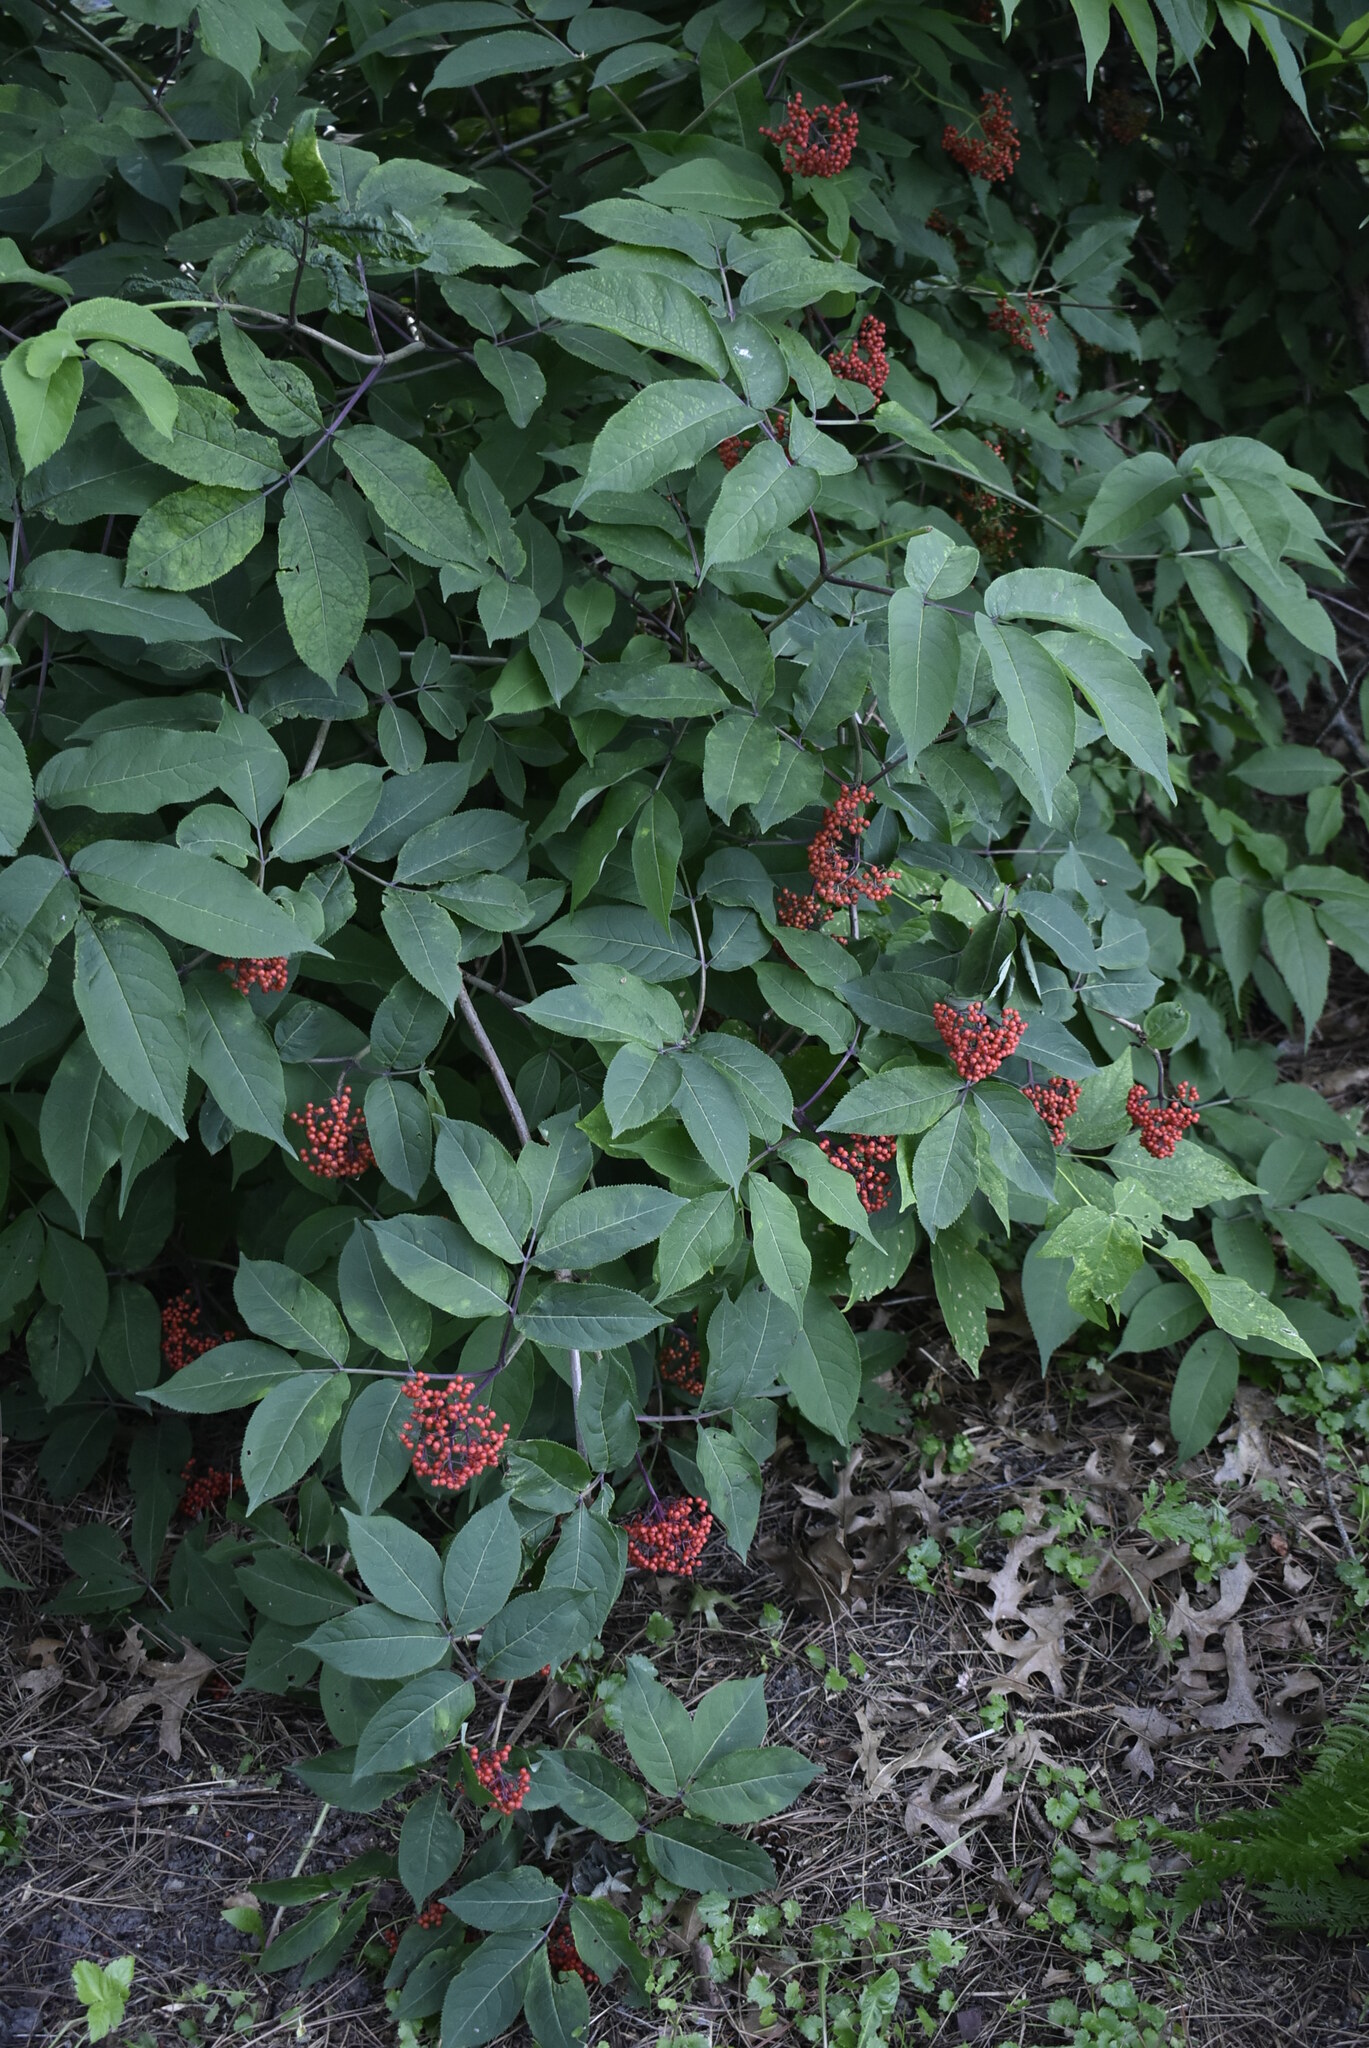 Red elderberry plant with clusters of bright red berries and pinnate compound leaves.